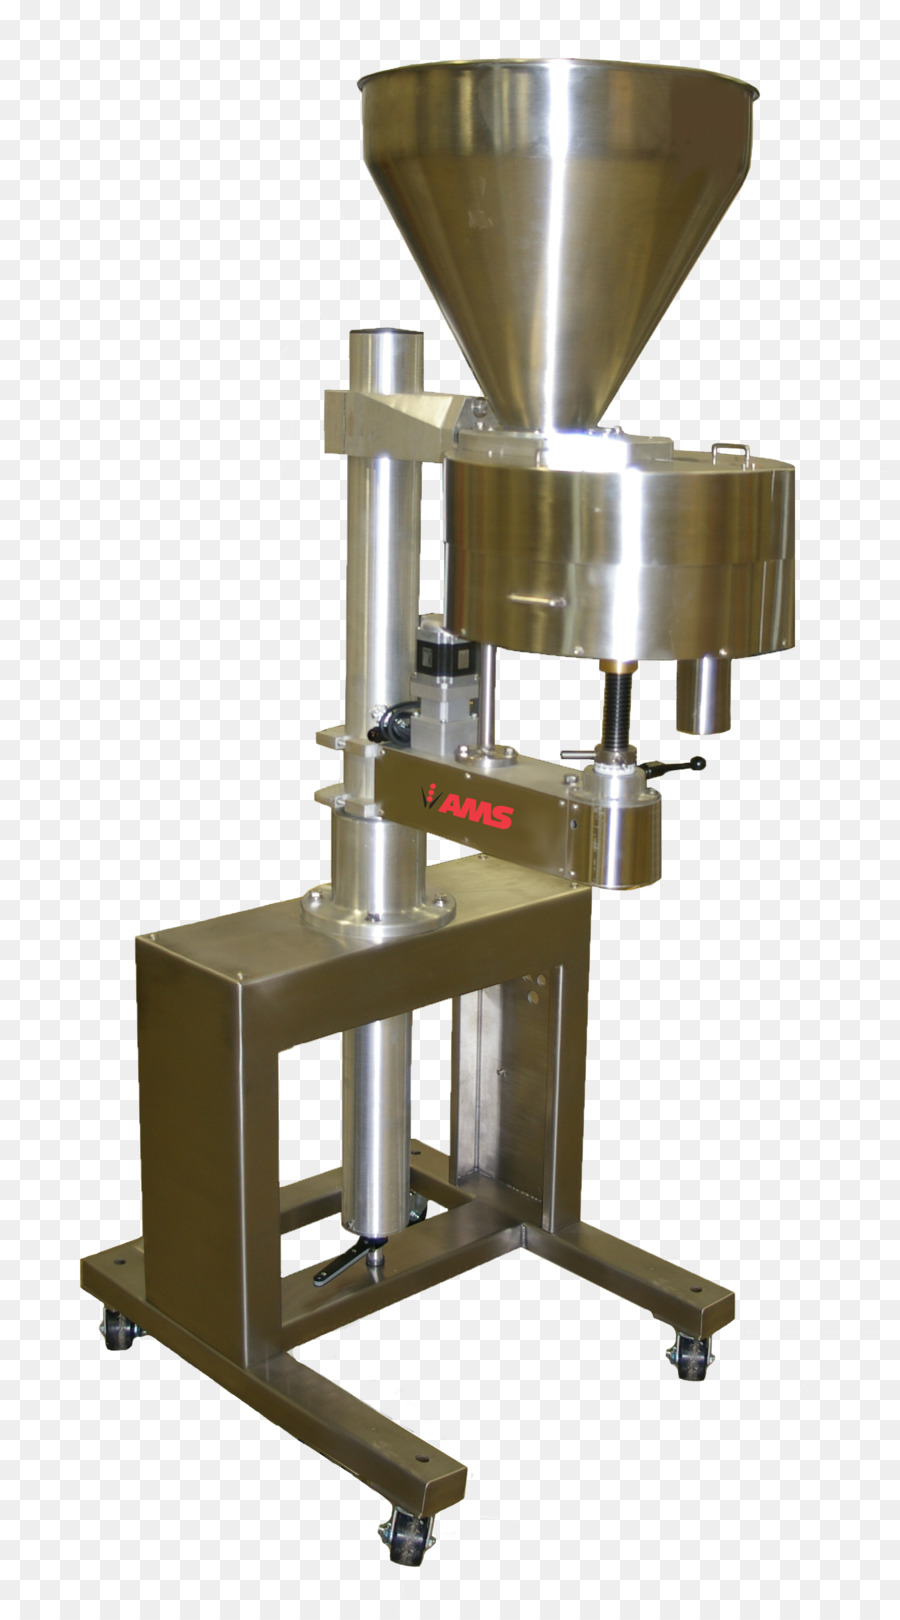 Maschine AMS Filling Systems Inc Spheretech Verpackung India Private Limited Industrie design - Chemical Automatik Design Bureau